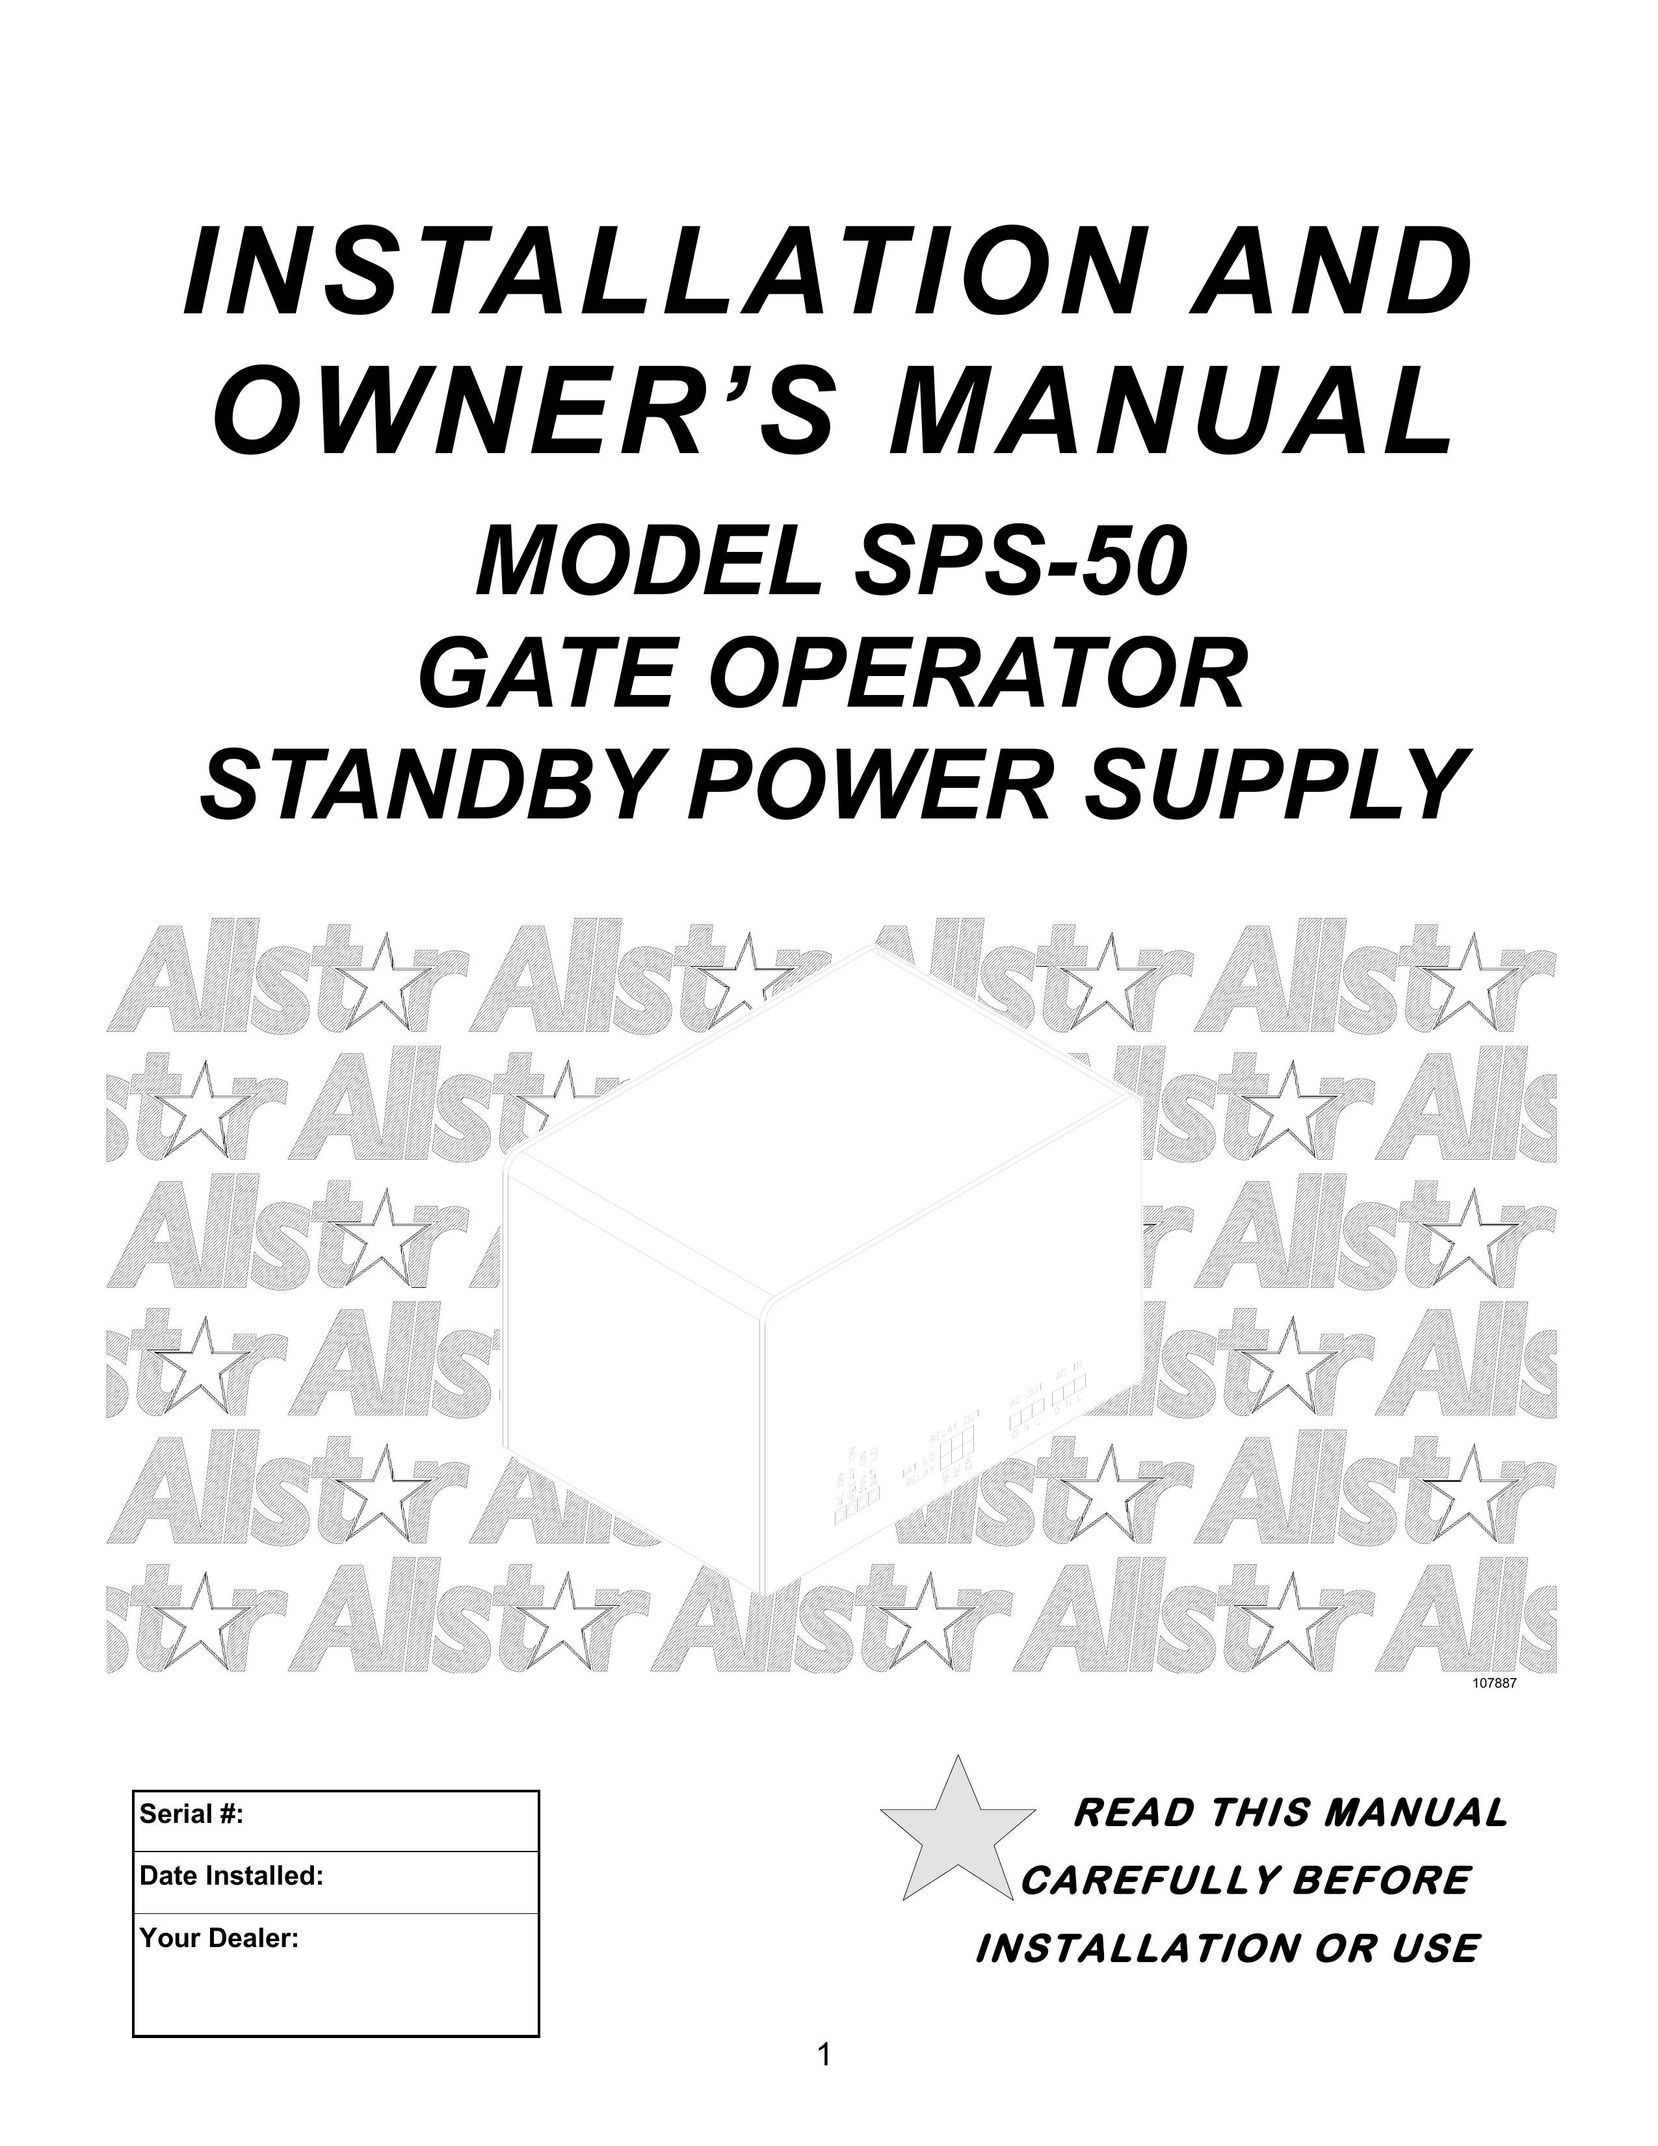 Allstar Products Group SPS-50 Power Supply User Manual